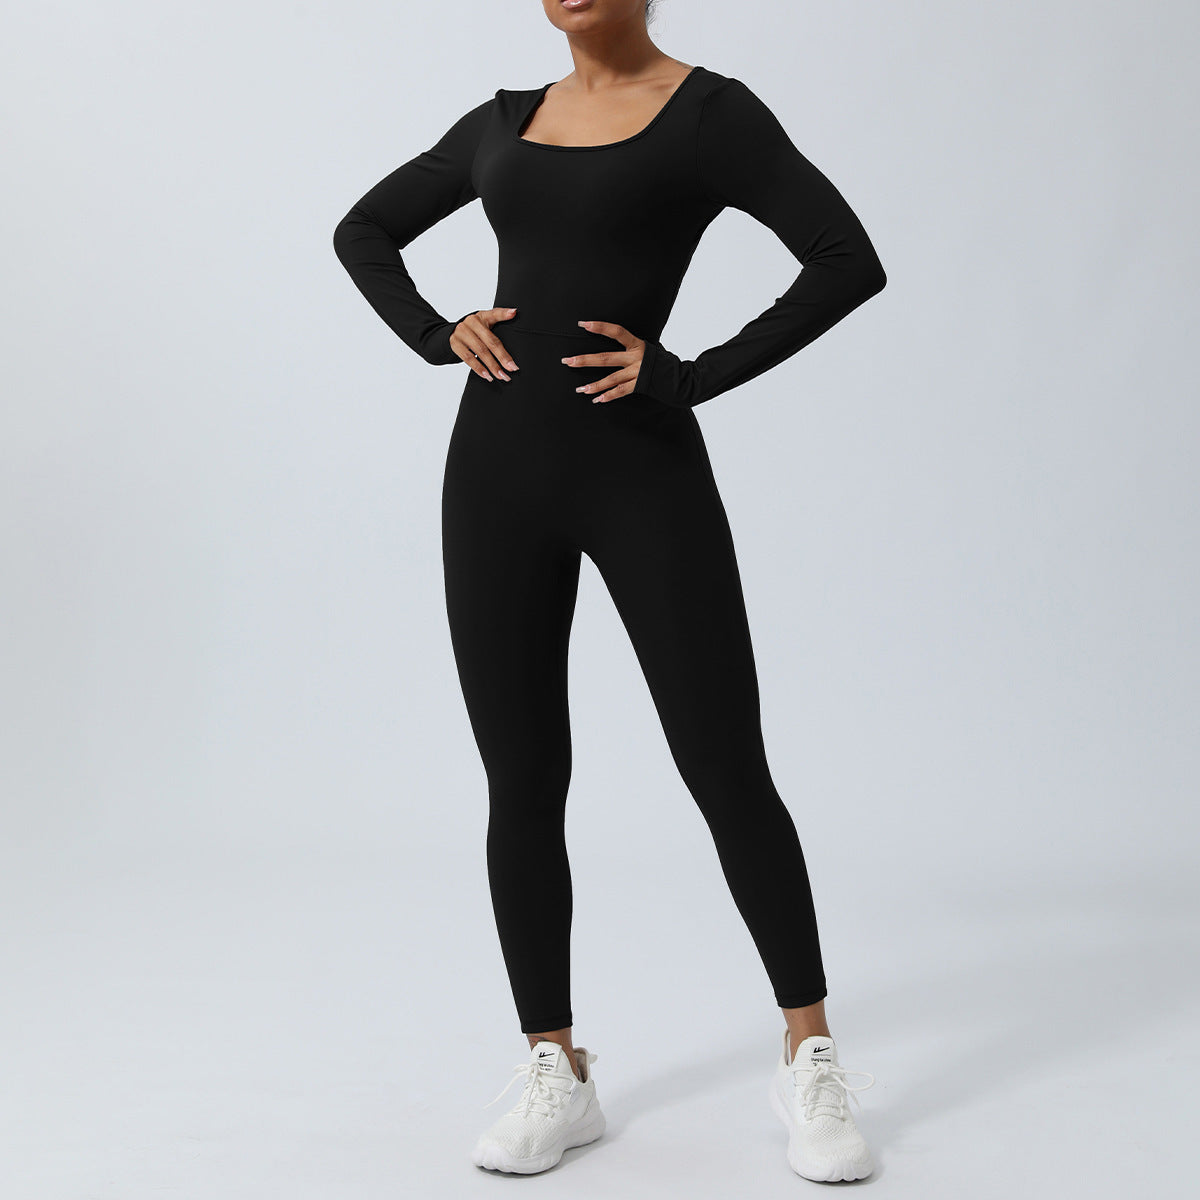 Women's Quick-drying Backless Bodysuit Hip Lifting